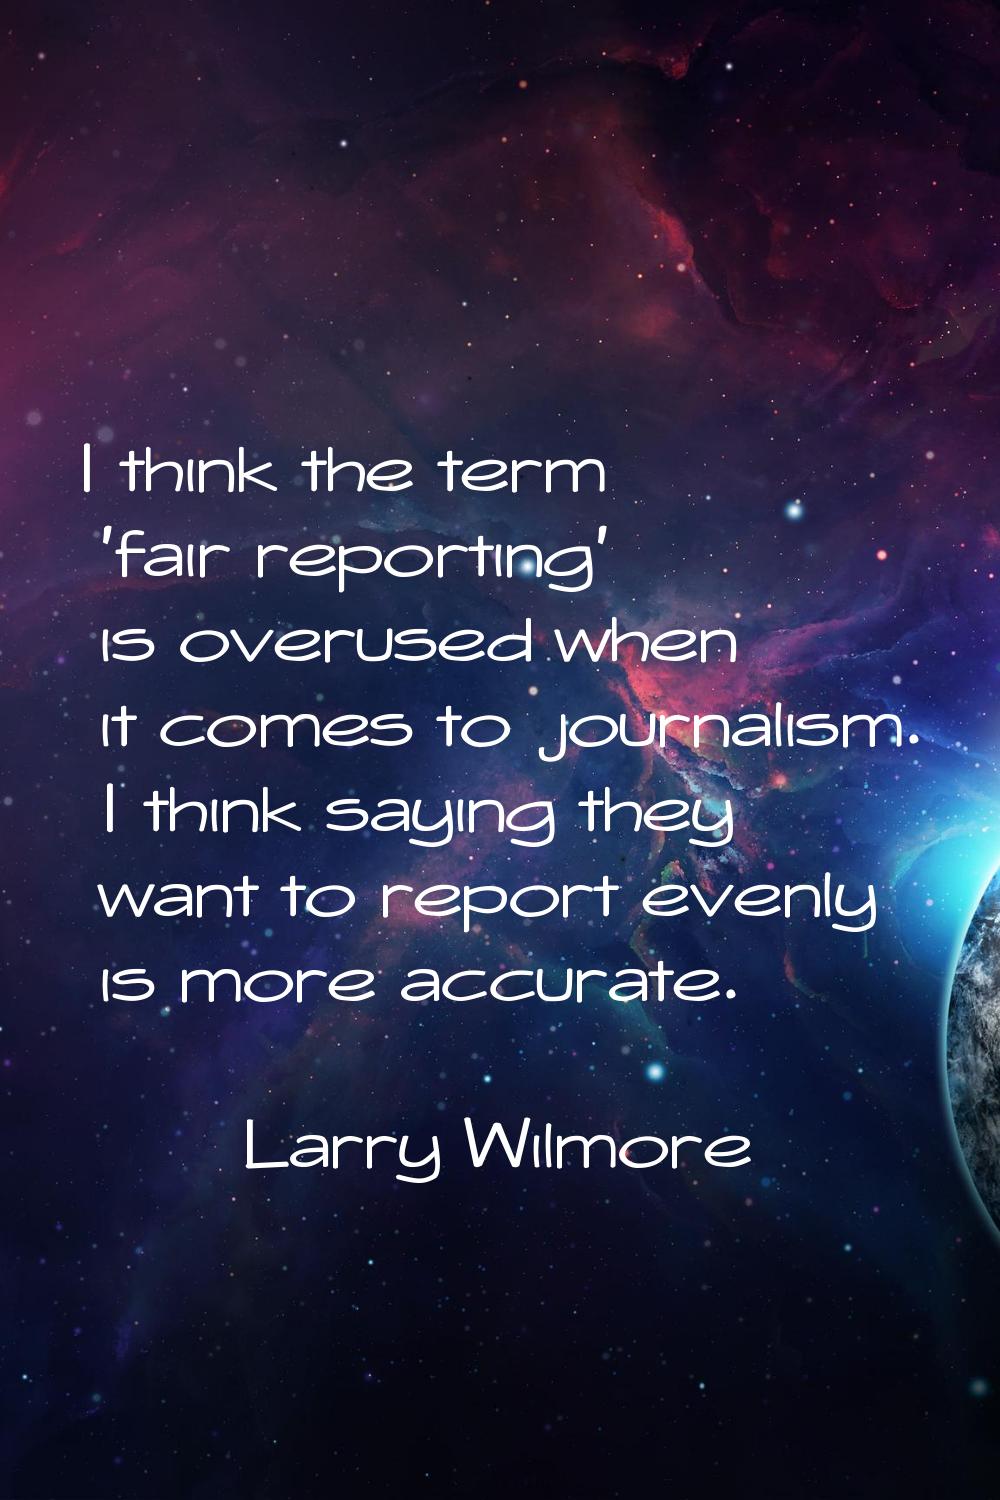 I think the term 'fair reporting' is overused when it comes to journalism. I think saying they want